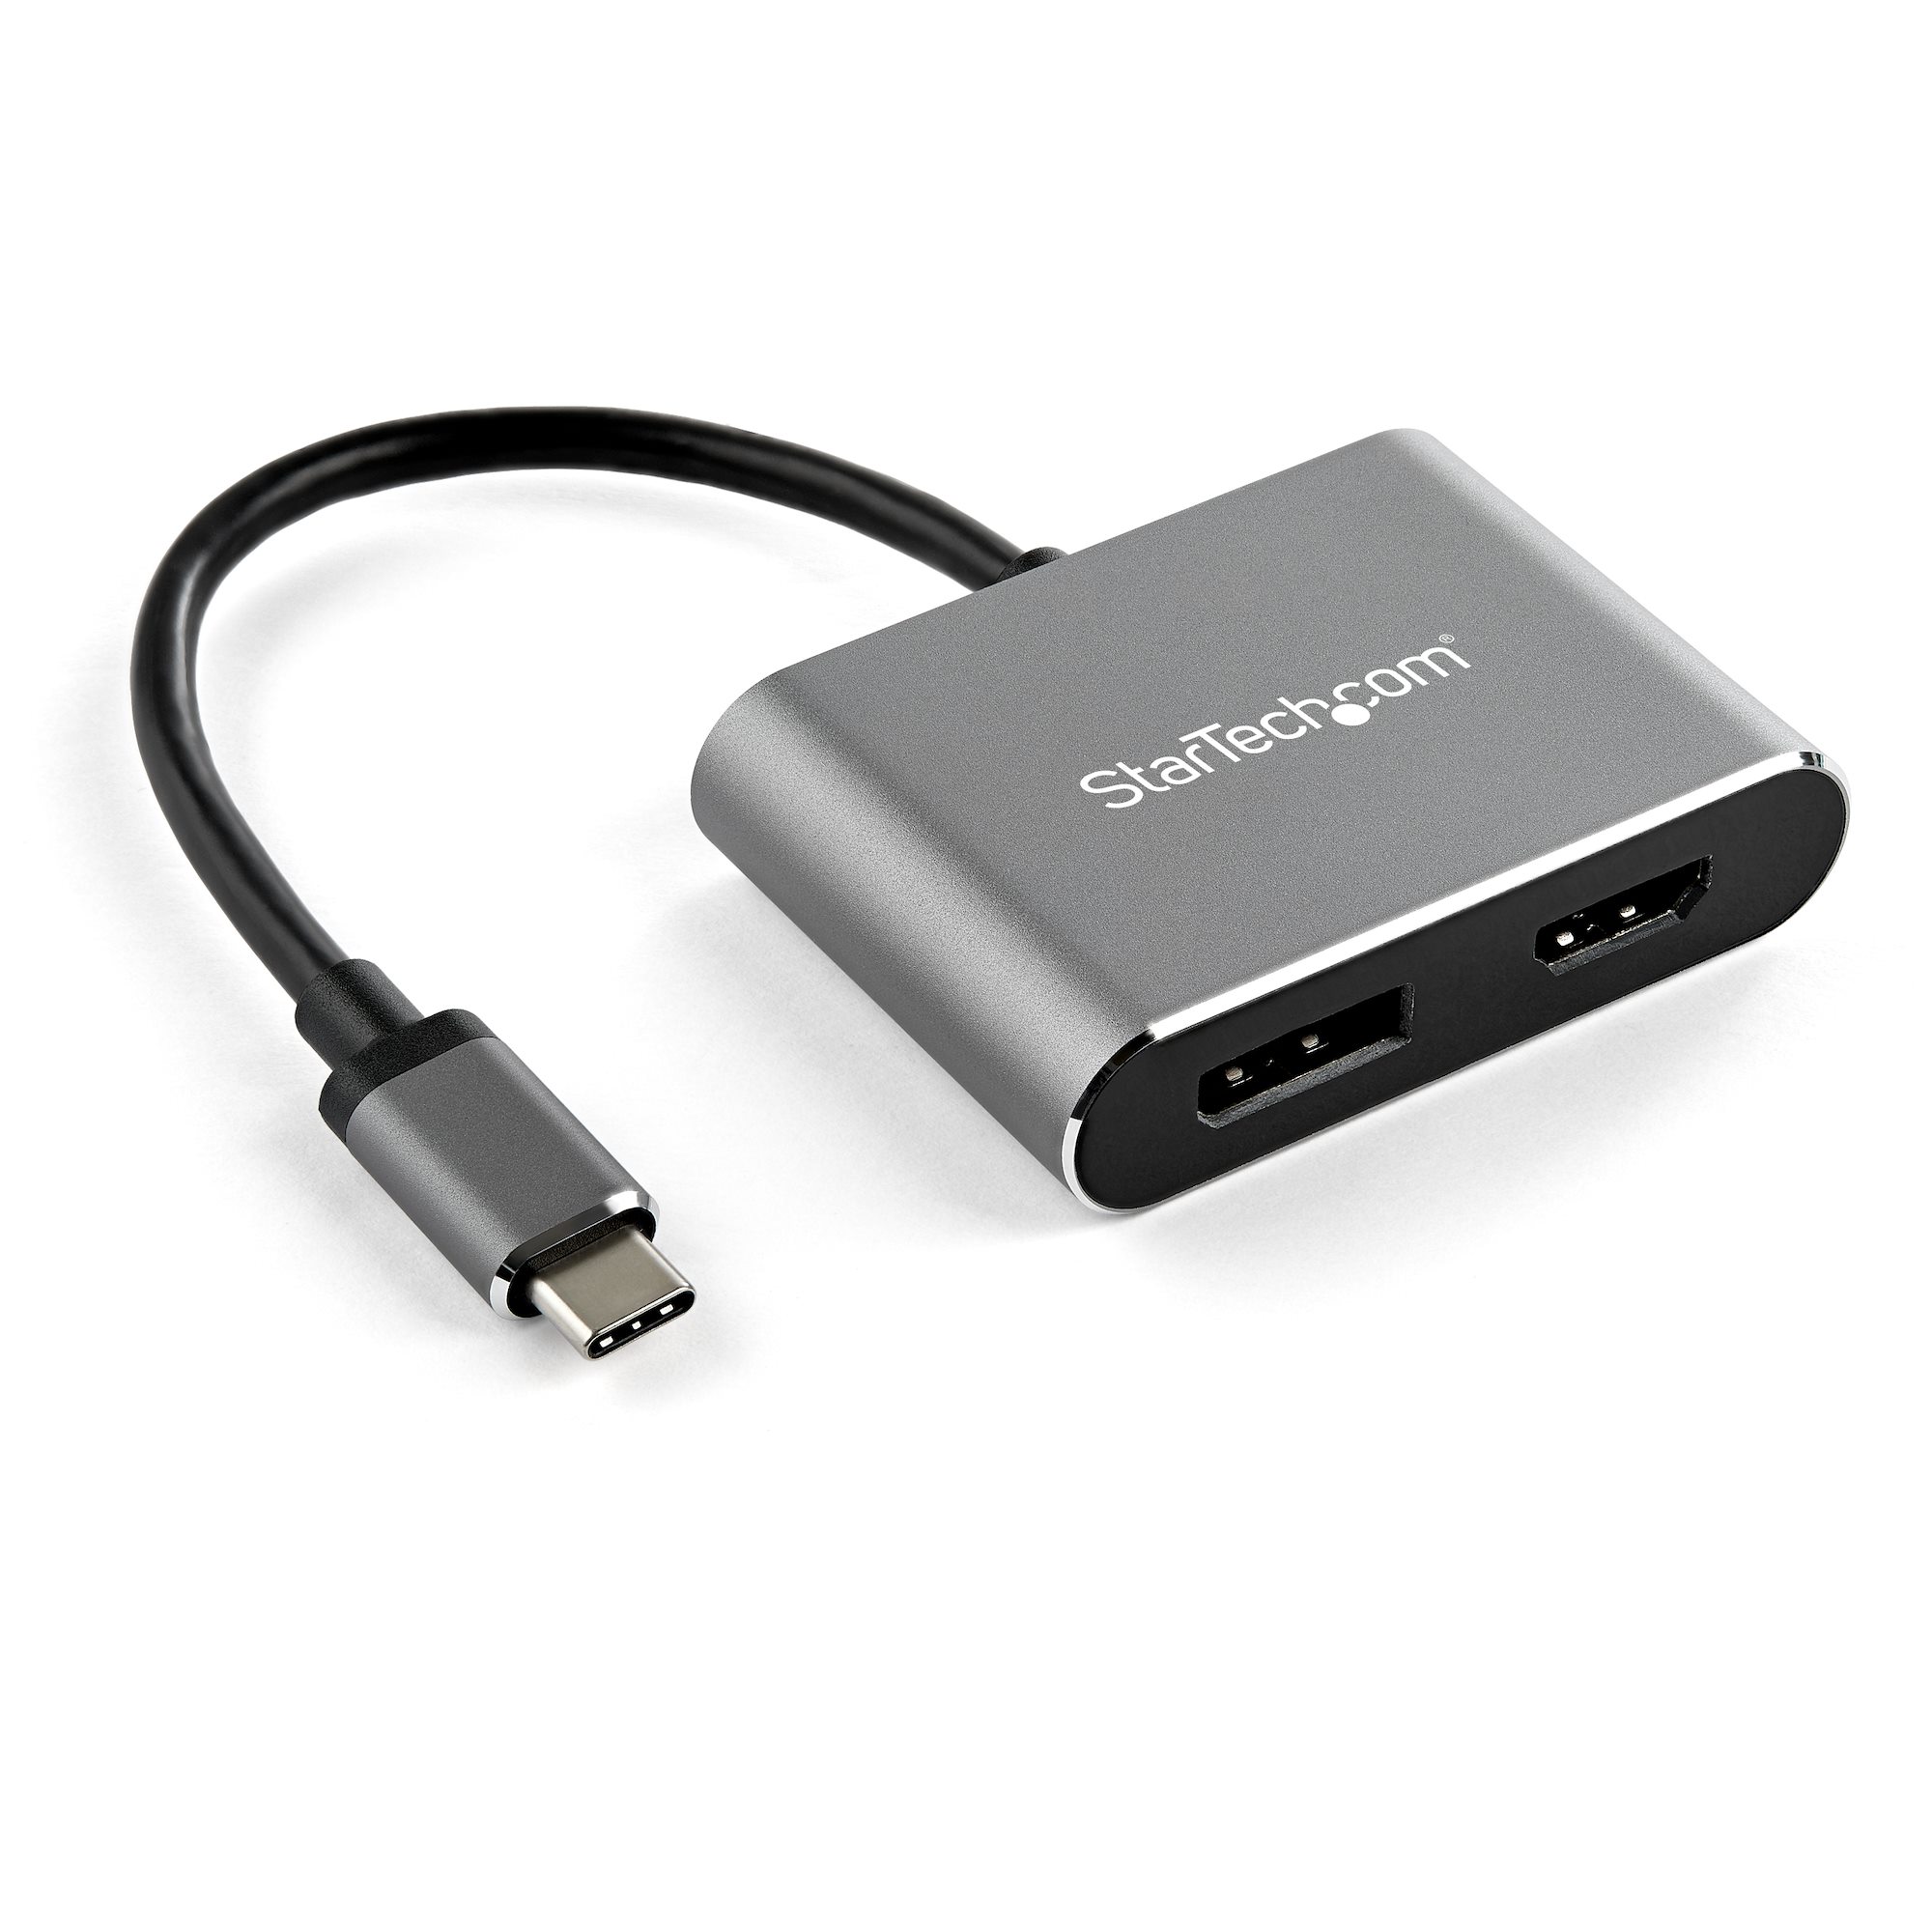 Lenovo USB C To HDMI VGA Adapter USB Type C To 4K HDMI 1080P VGA Converter Compatible For USB Type C Devices 